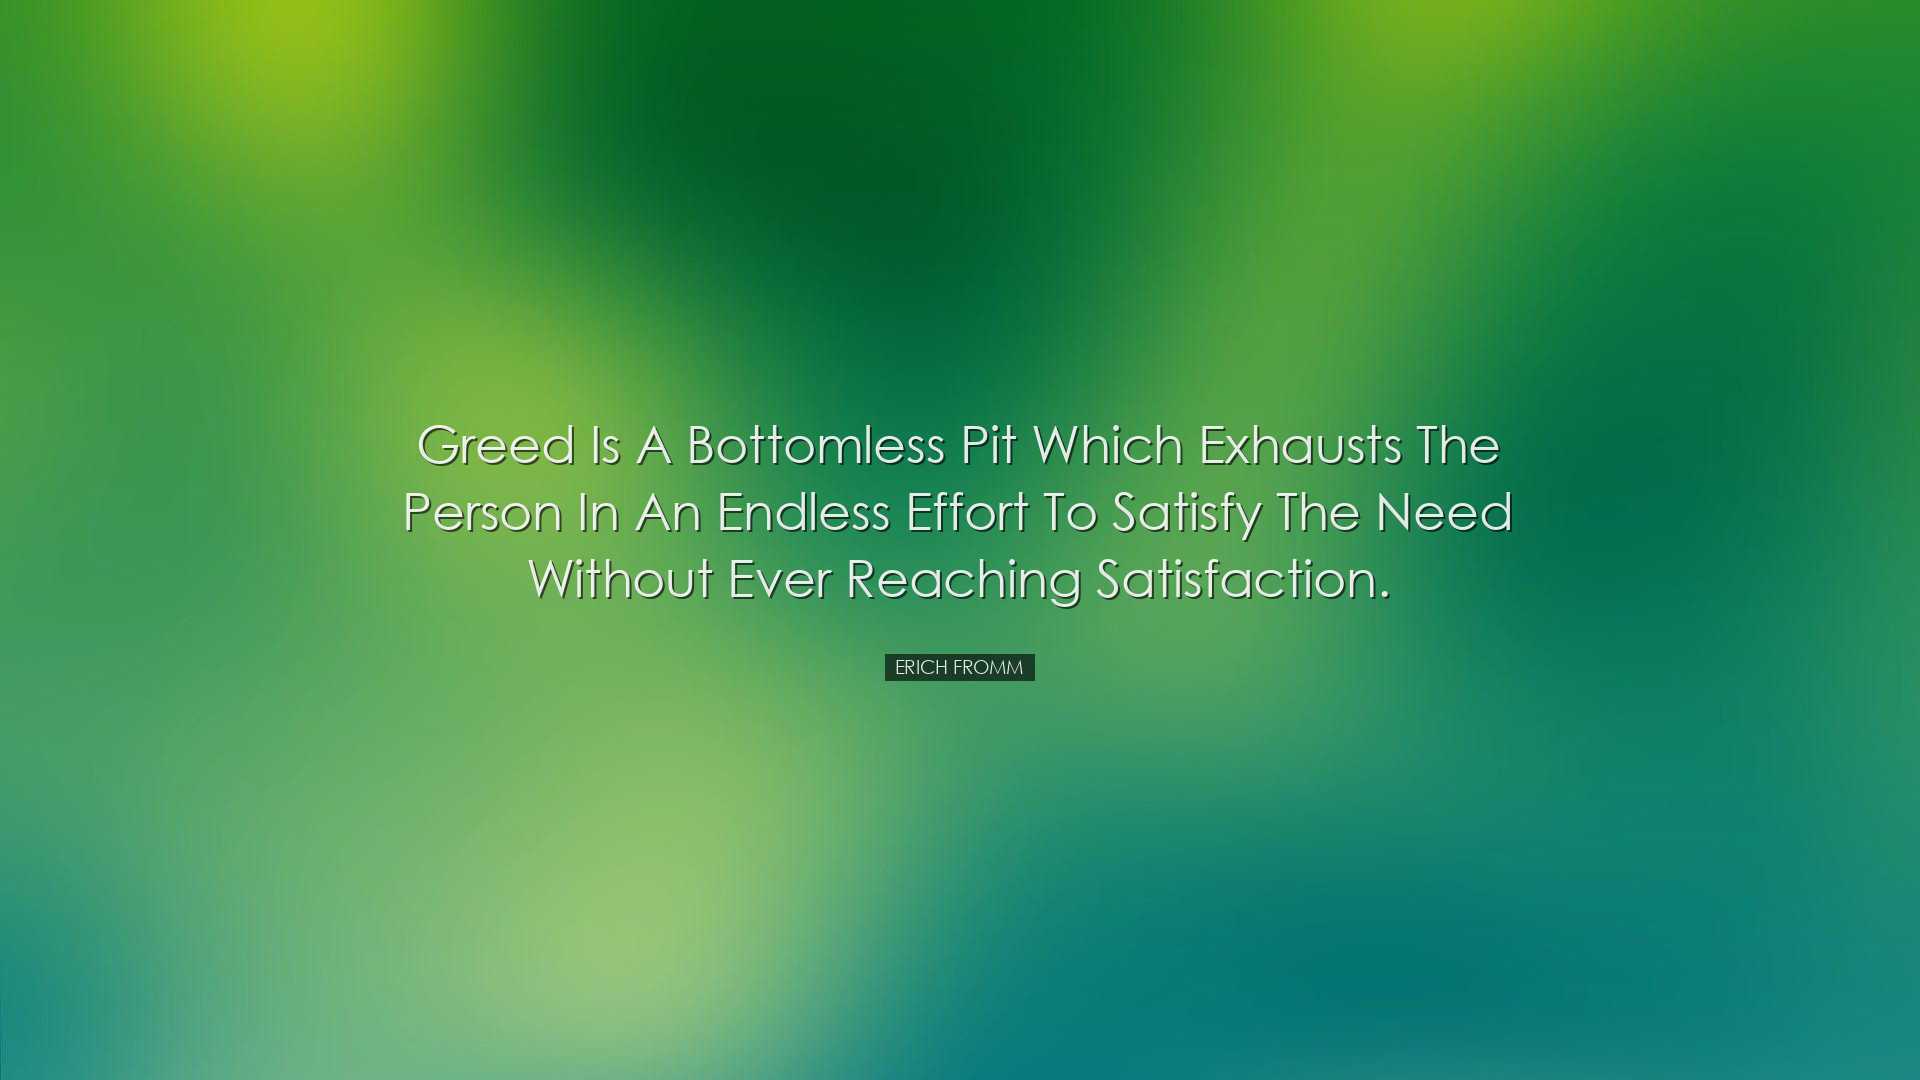 Greed is a bottomless pit which exhausts the person in an endless